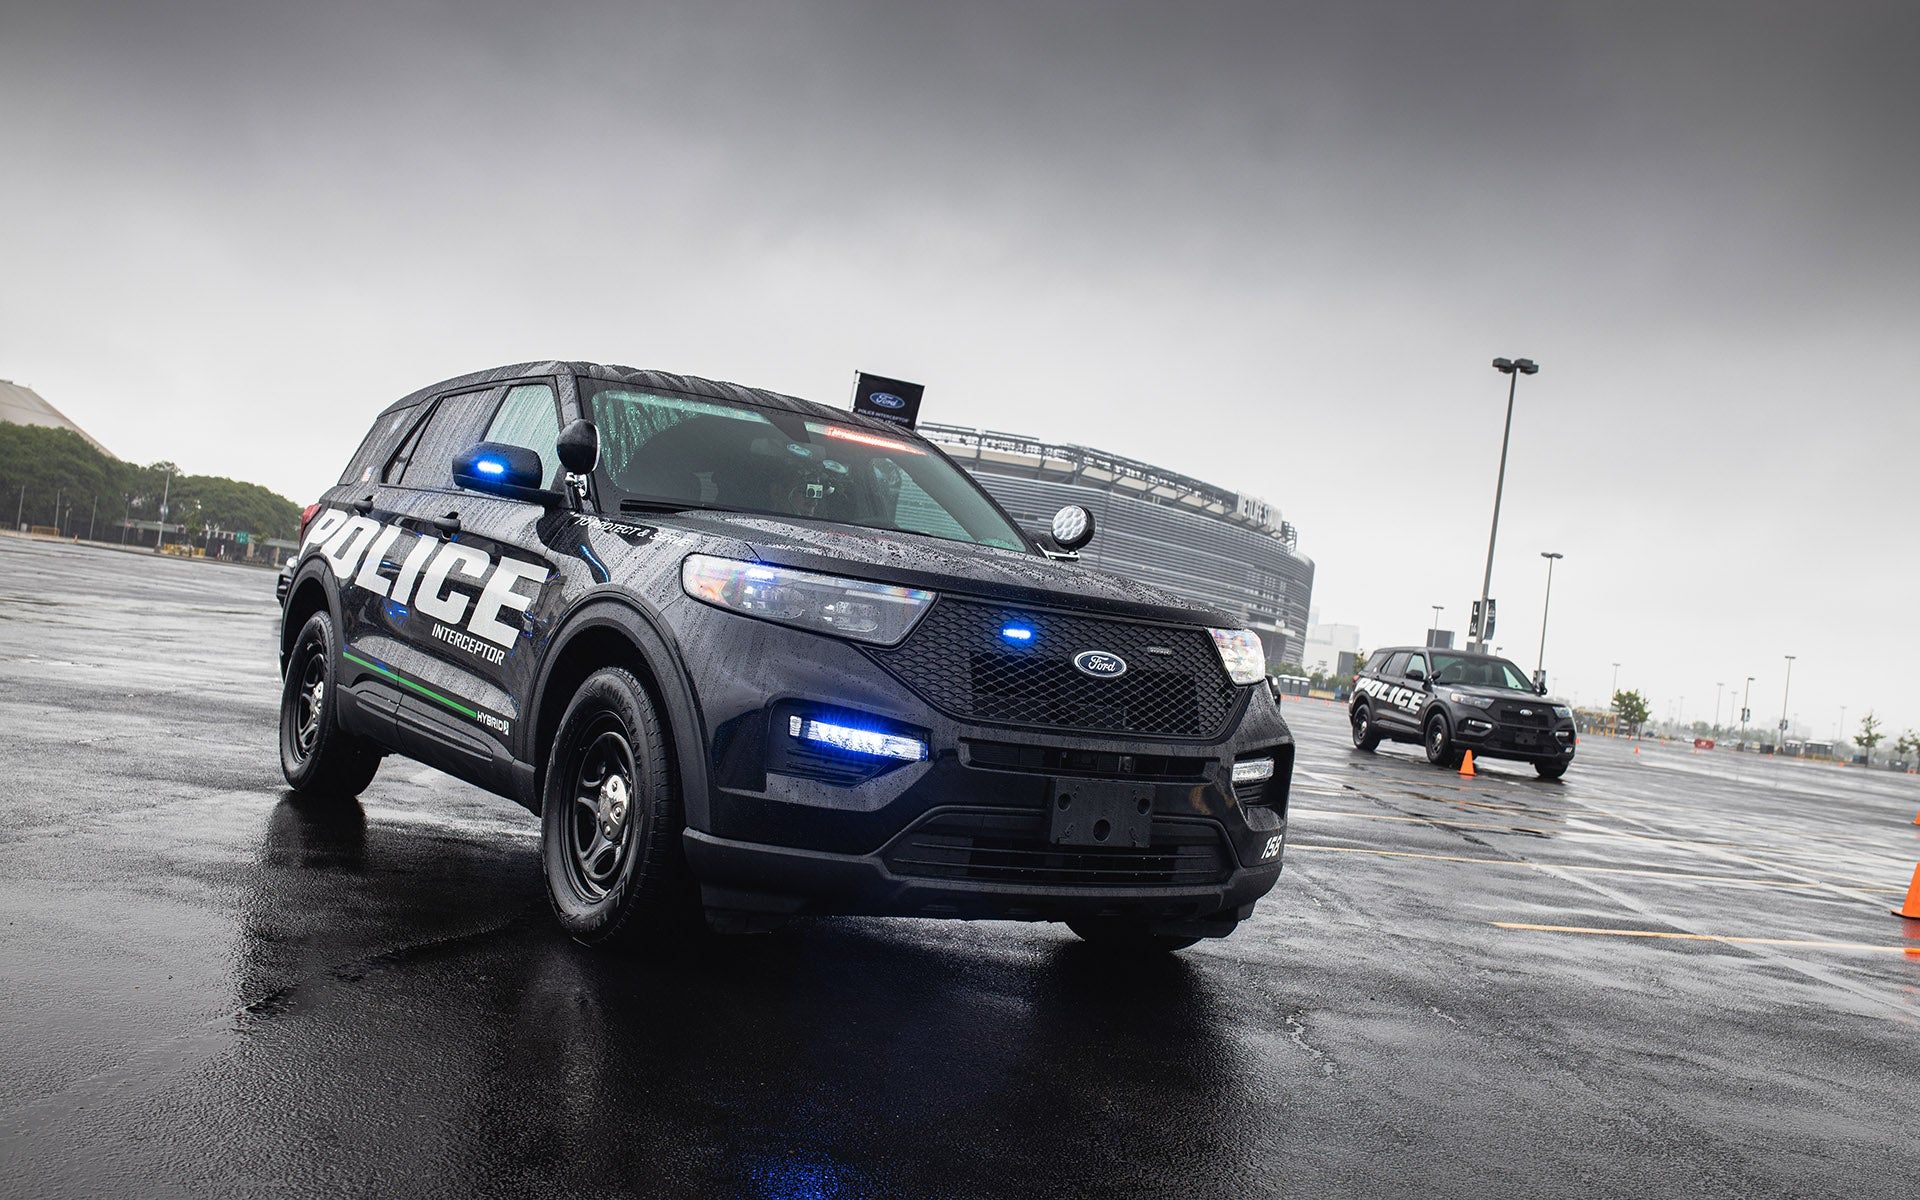 2020 Ford Police Interceptor Wallpapers Wallpaper Cave